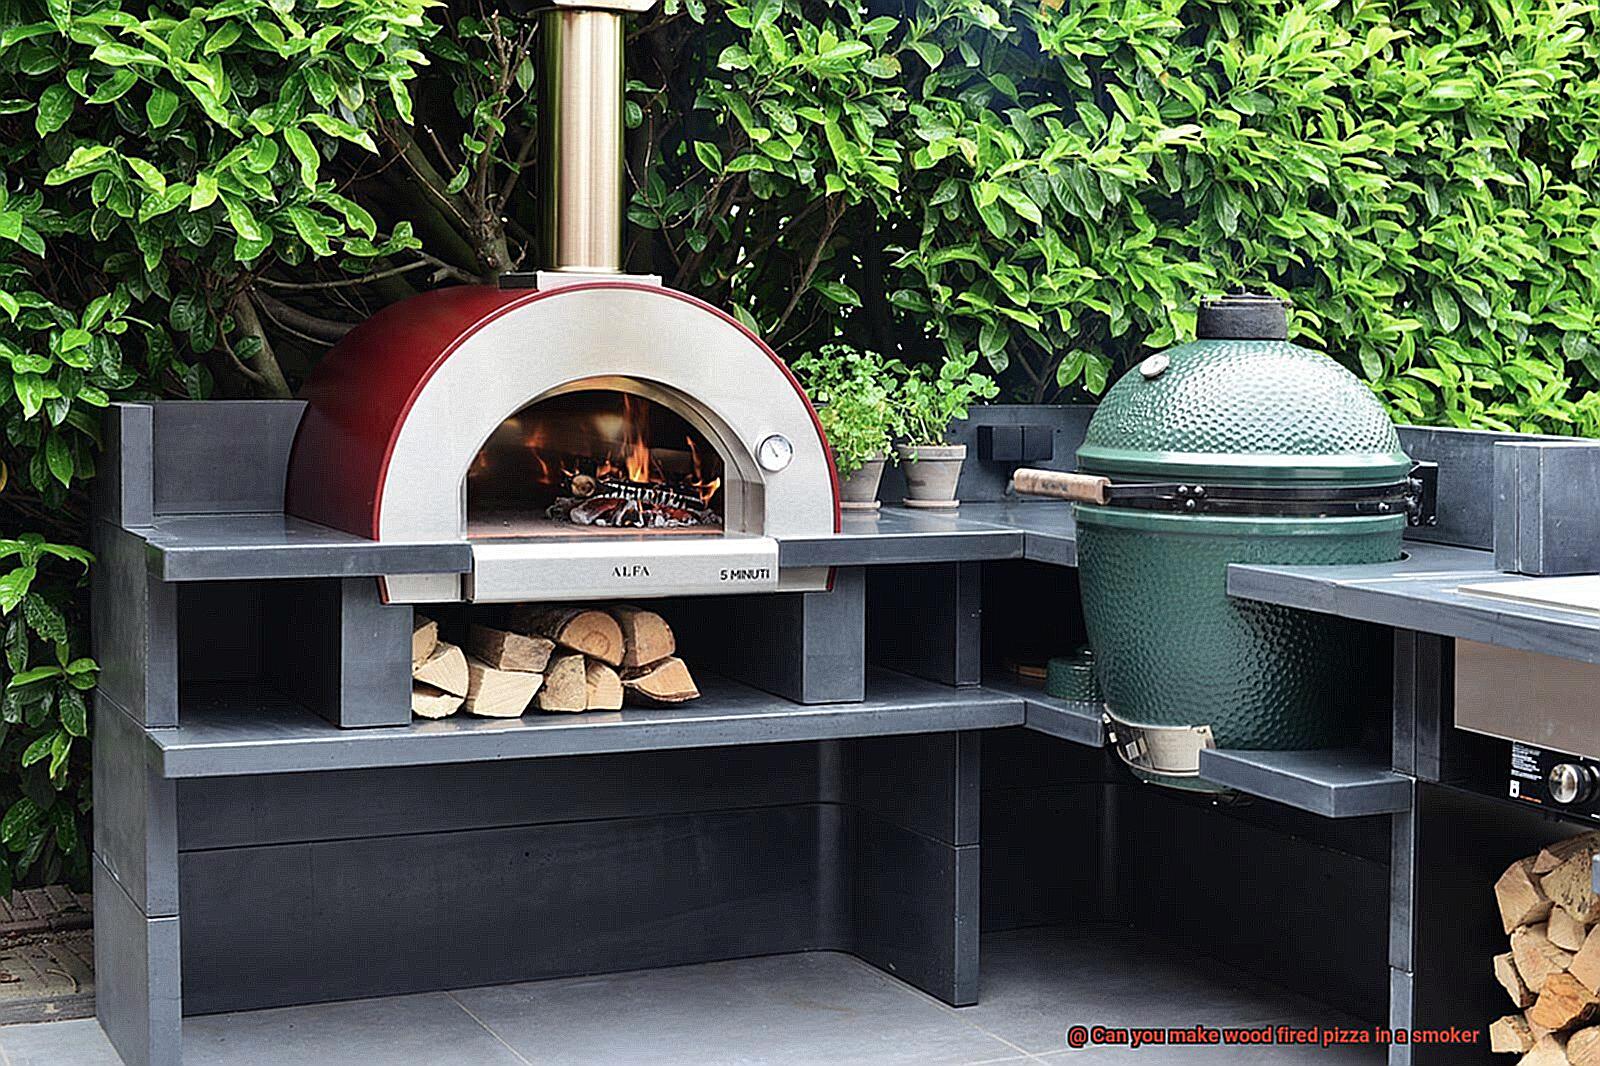 Can you make wood fired pizza in a smoker-2